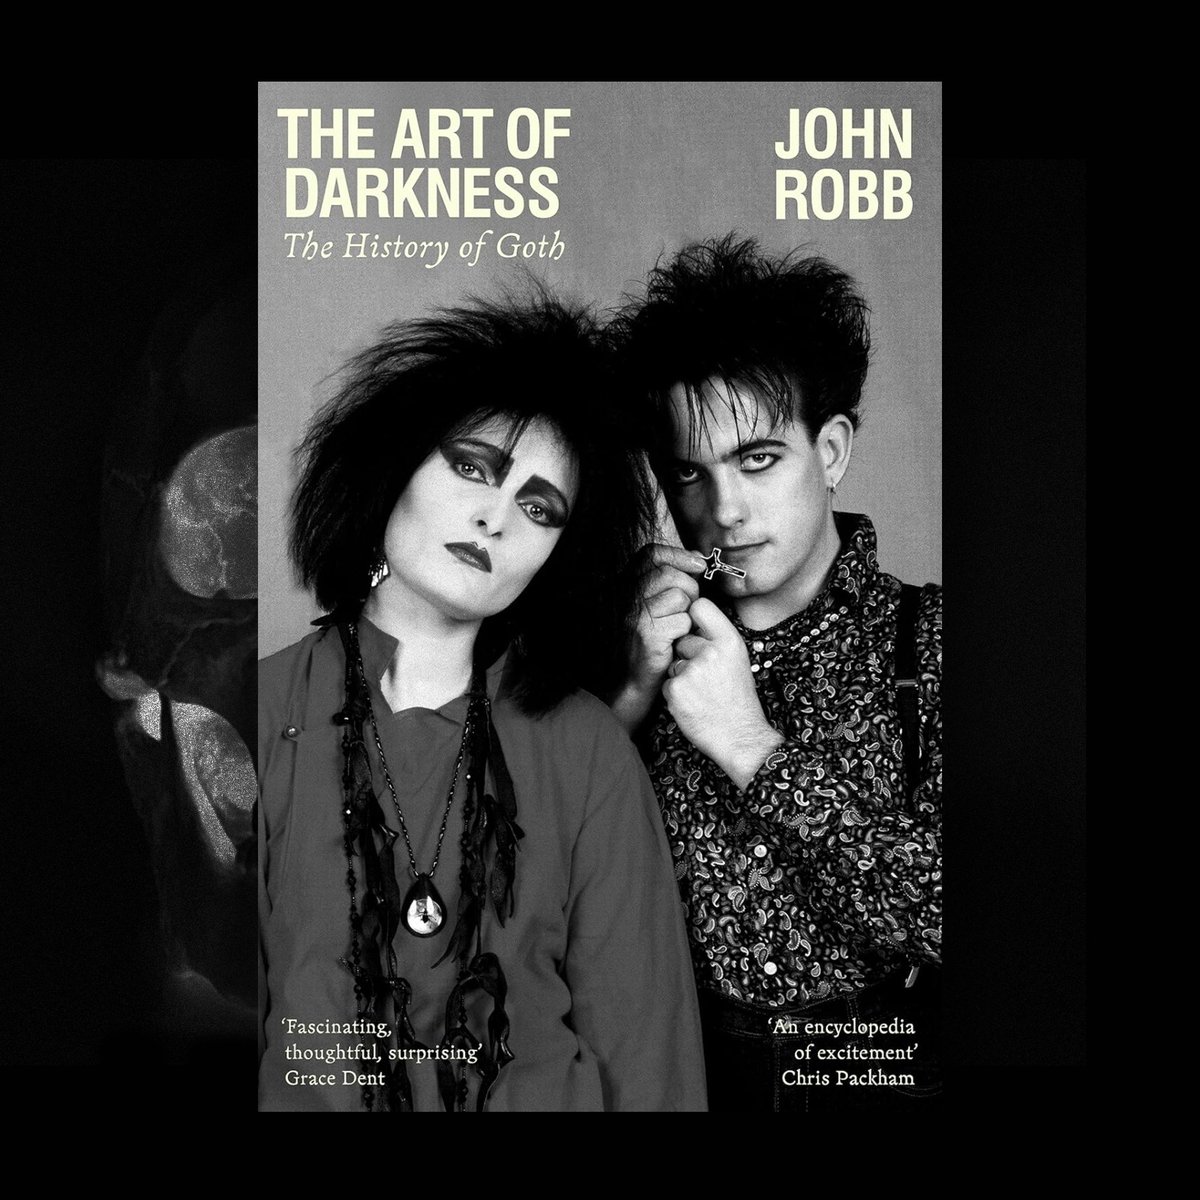 Due to high demand, @johnrobb77's upcoming event at @deadinkbookshop has now been moved to @theBluecoat in #Liverpool city centre. Join us for an evening with musician & author John discussing the history of goth with local legend Roger Hill. Tickets: deadinkbookshop.com/products/the-h…